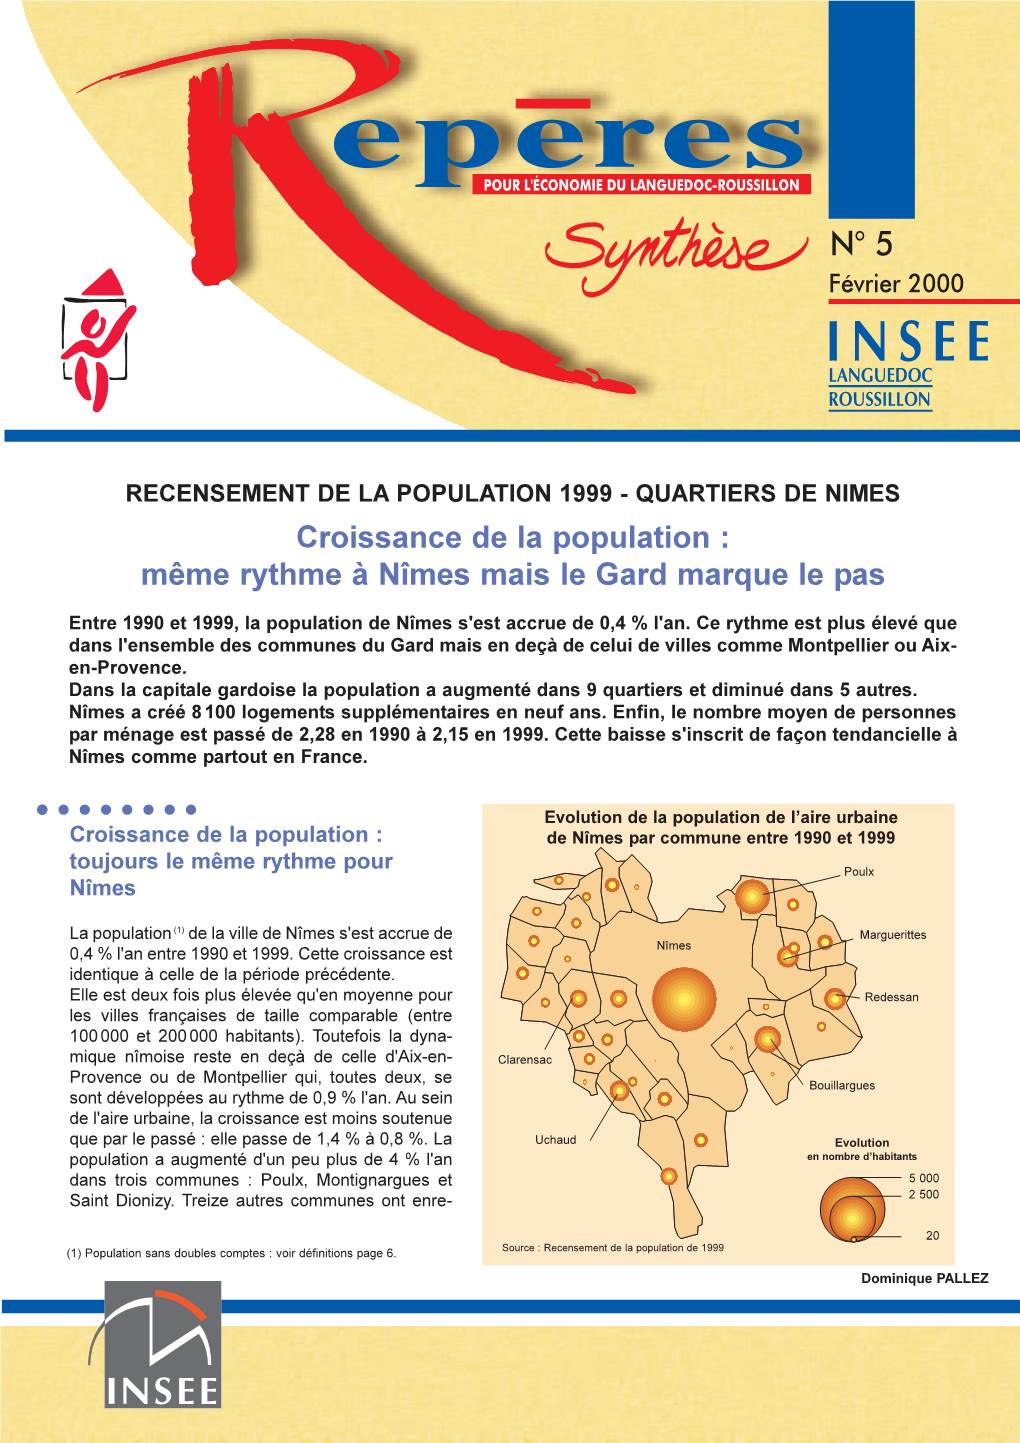 Census of the Population 1999 - Quarters of Nimes